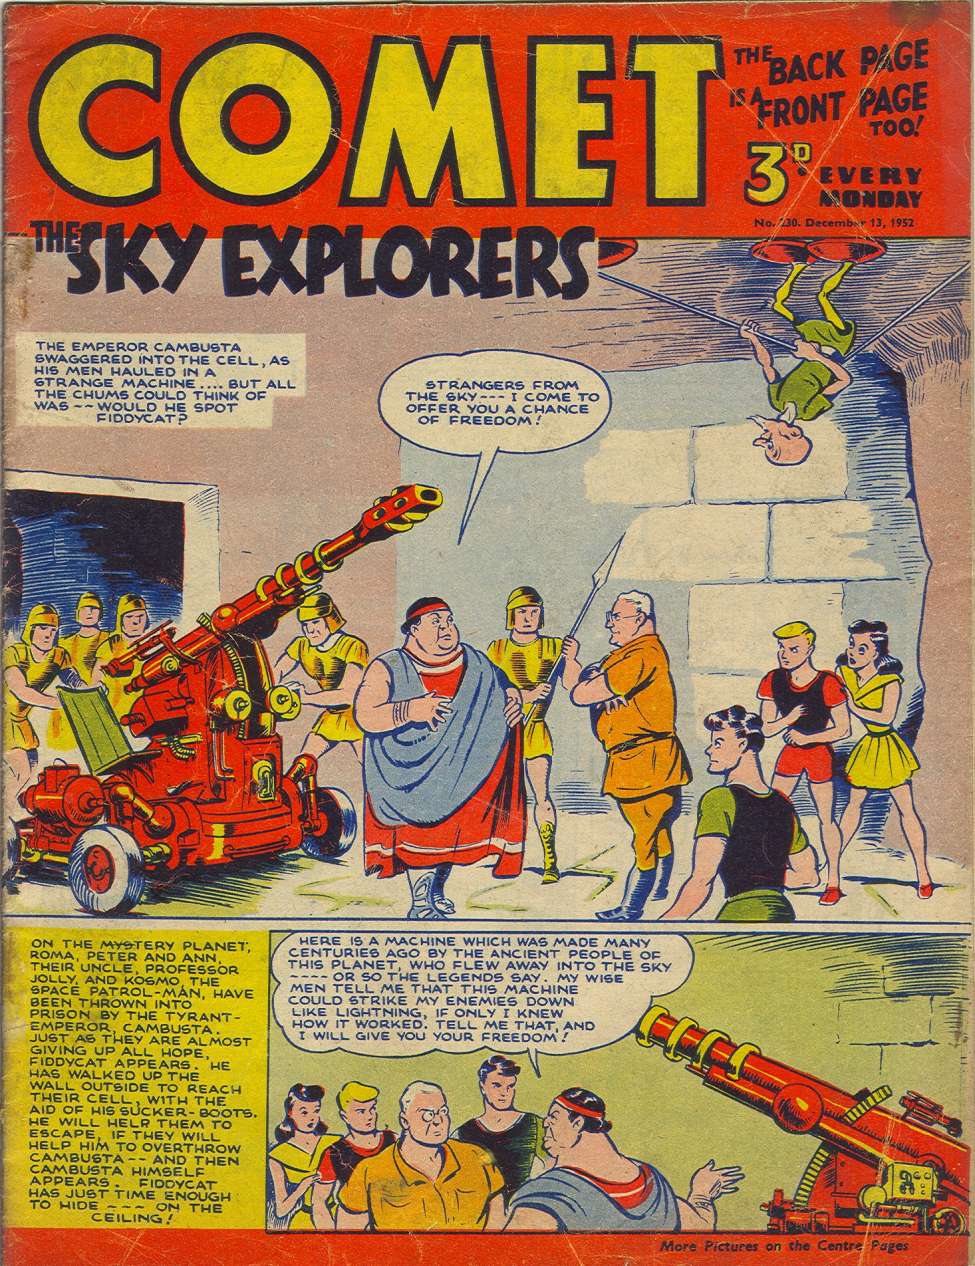 Book Cover For The Comet 230